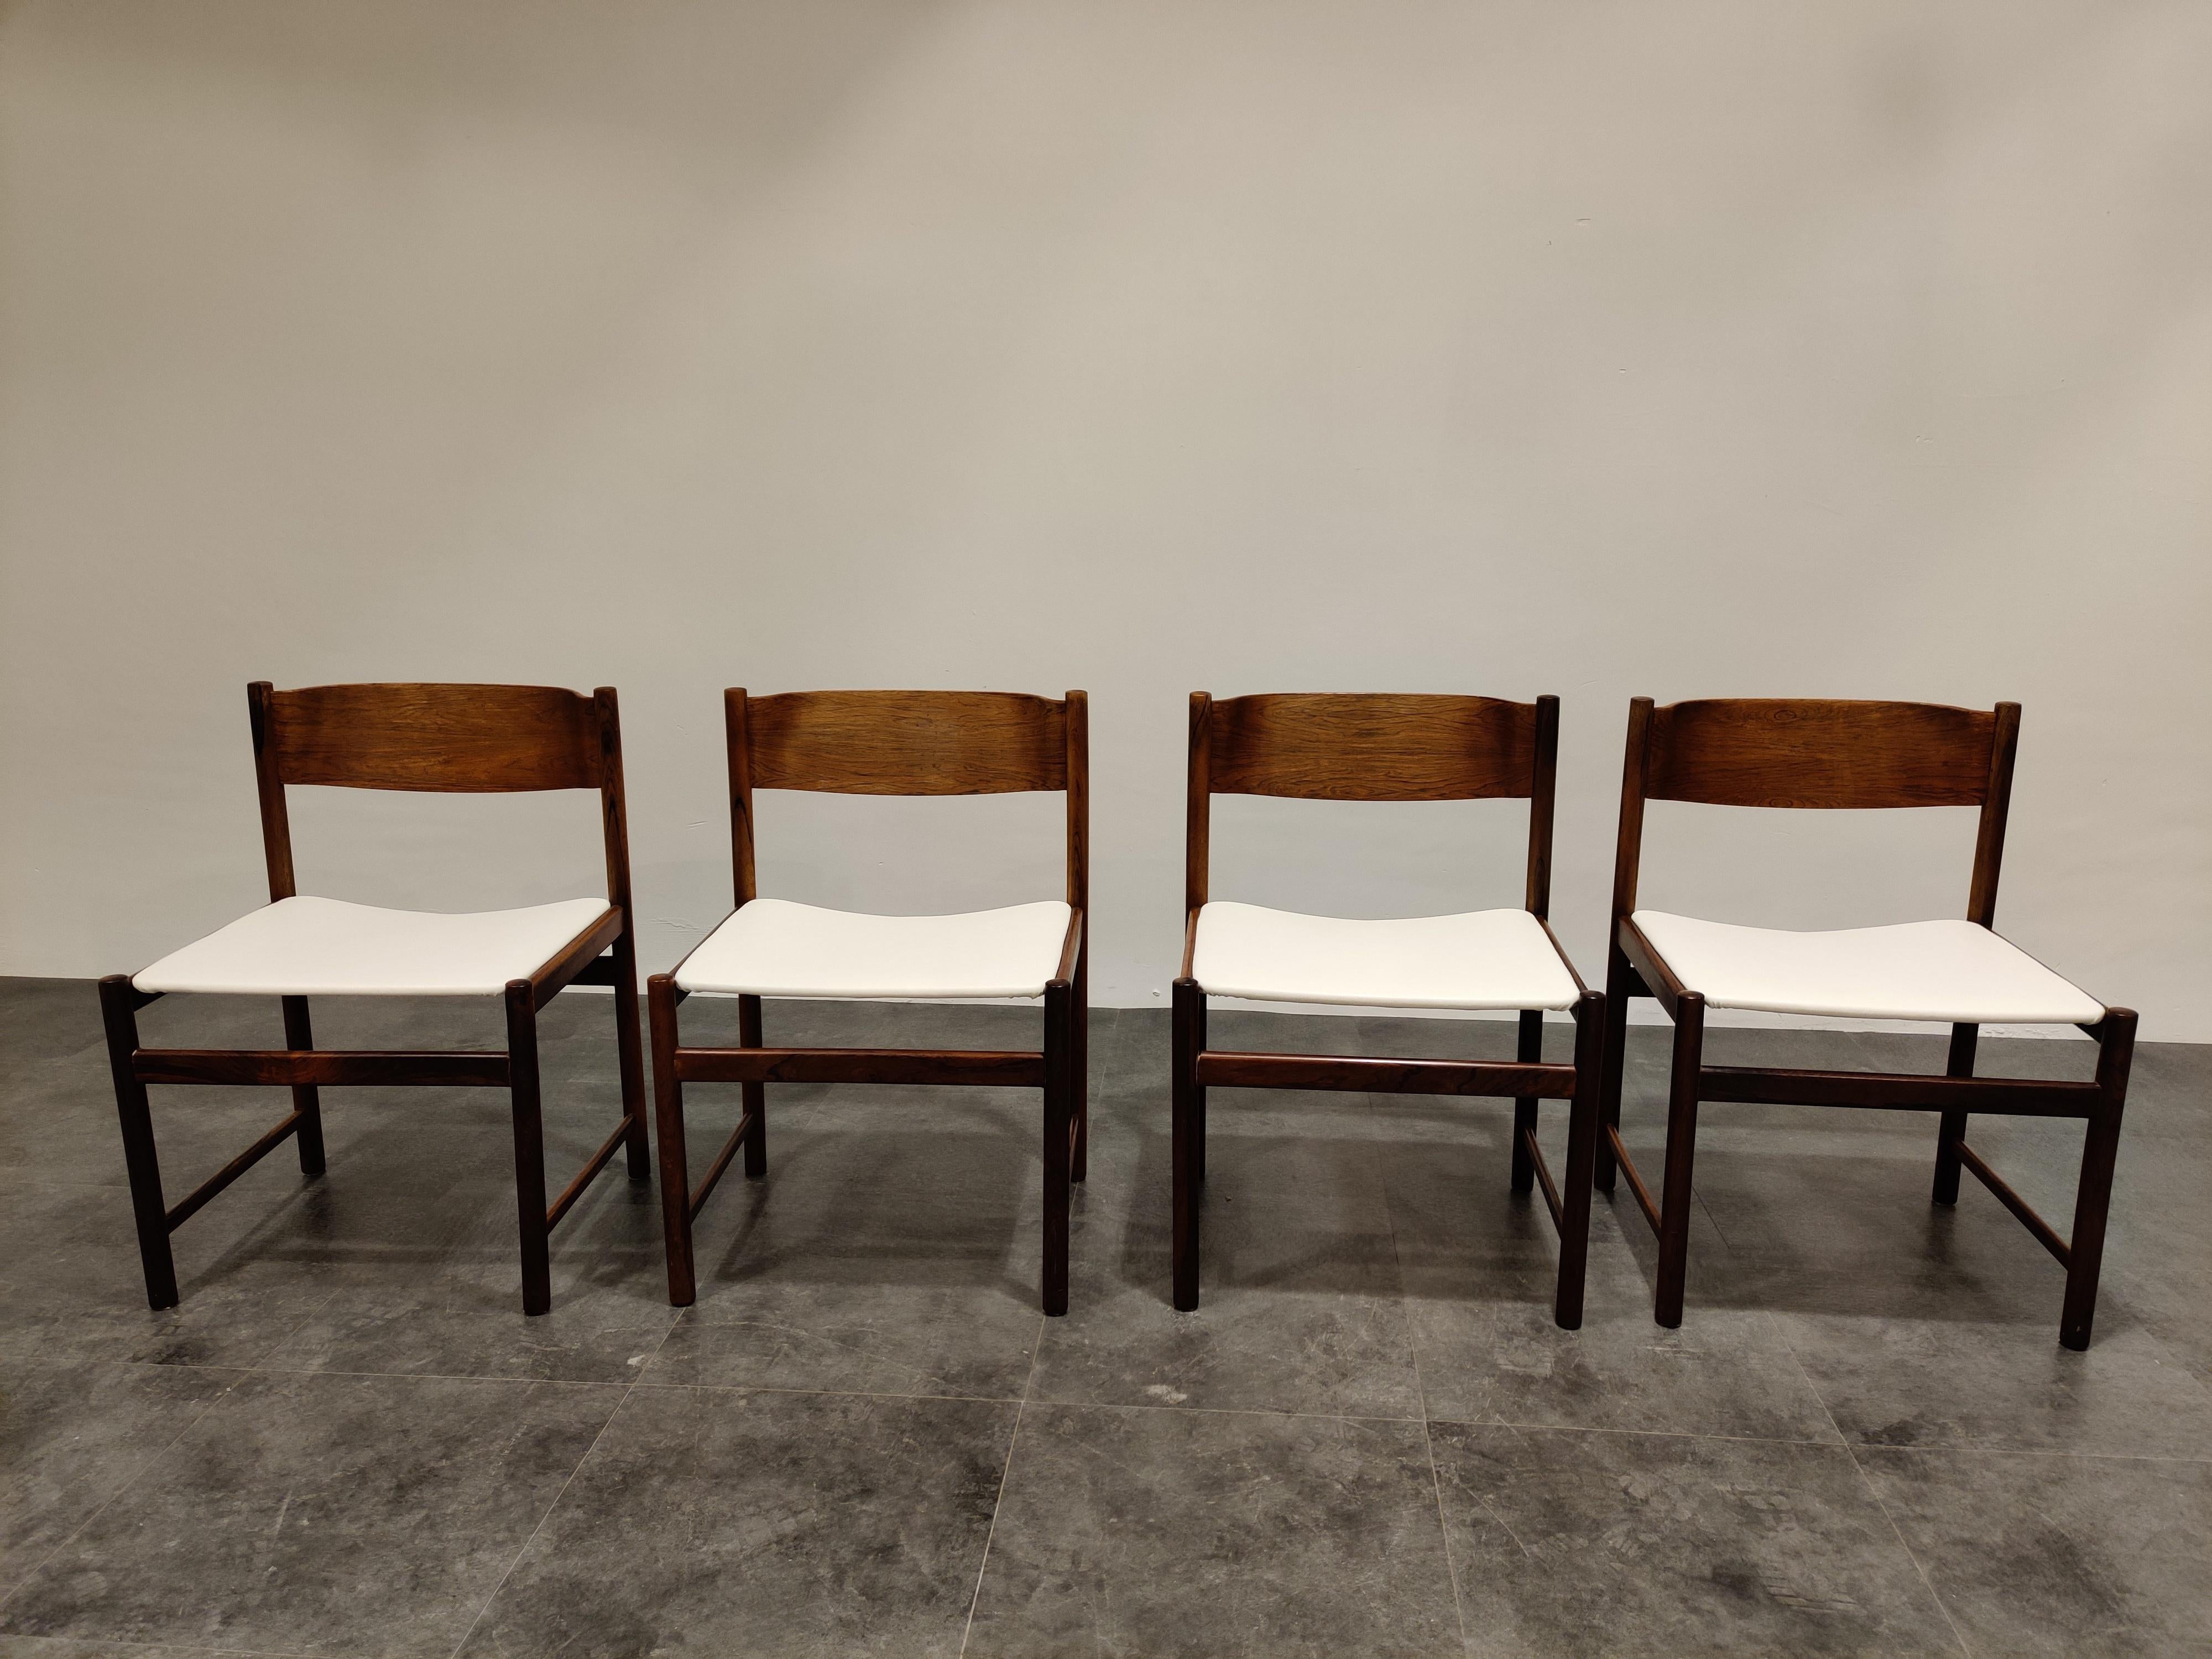 Finely designed set of 4 dining chairs possibly by Cees Braakman for Pastoe.

The chairs are well made and have a beautiful organic shape with a nice wood grain.

The chairs feature a teak wooden frame upholstered with white skai (faux